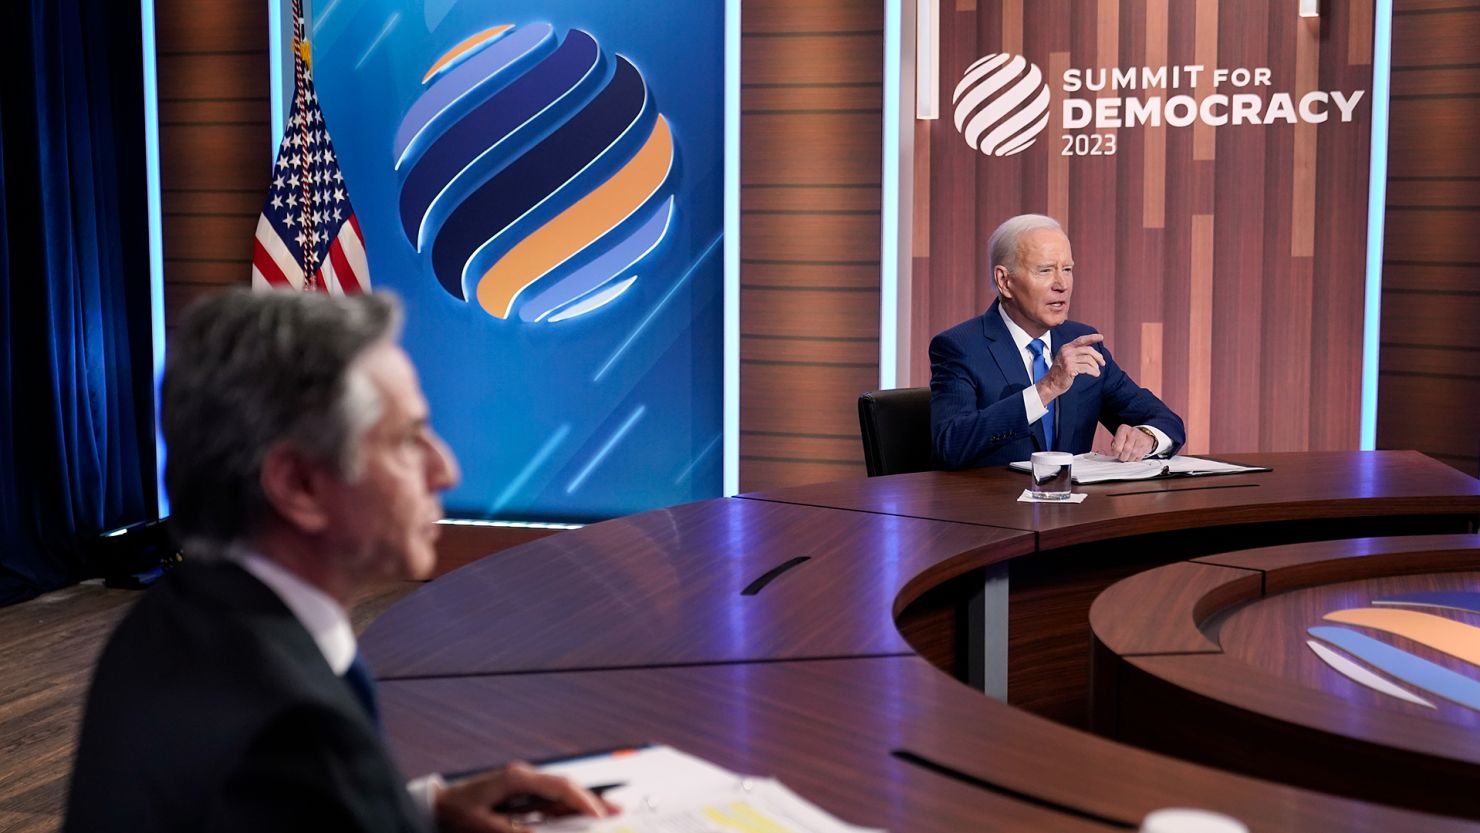 President Joe Biden speaks alongside Secretary of State Antony Blinken during a Summit for Democracy virtual plenary in the South Court Auditorium on the White House campus, Wednesday, March 29, 2023, in Washington, DC.